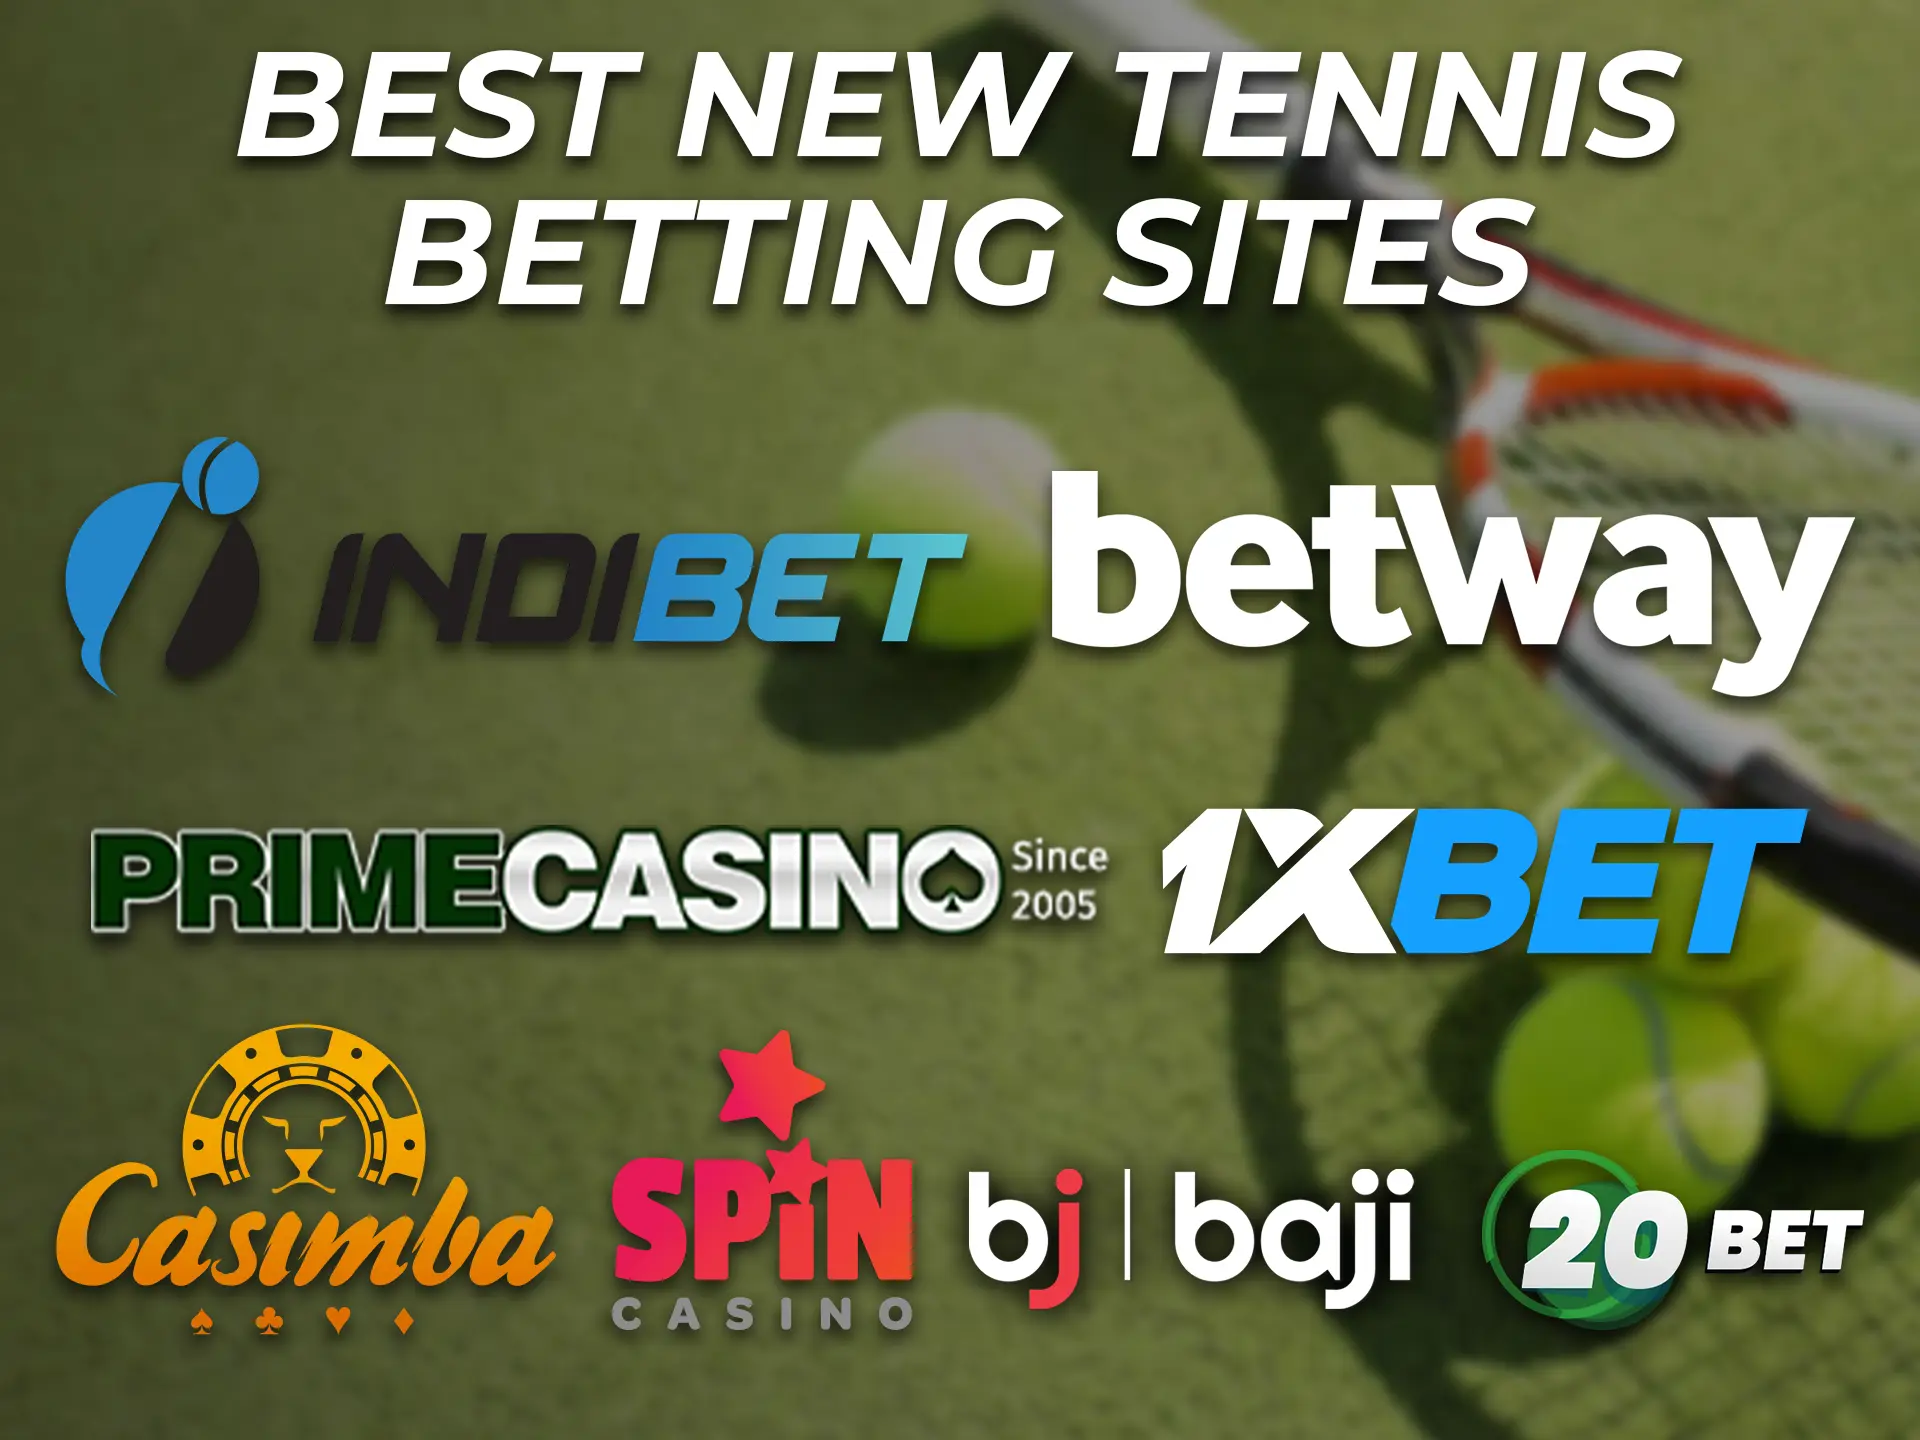 Check out the new best tennis betting sites.